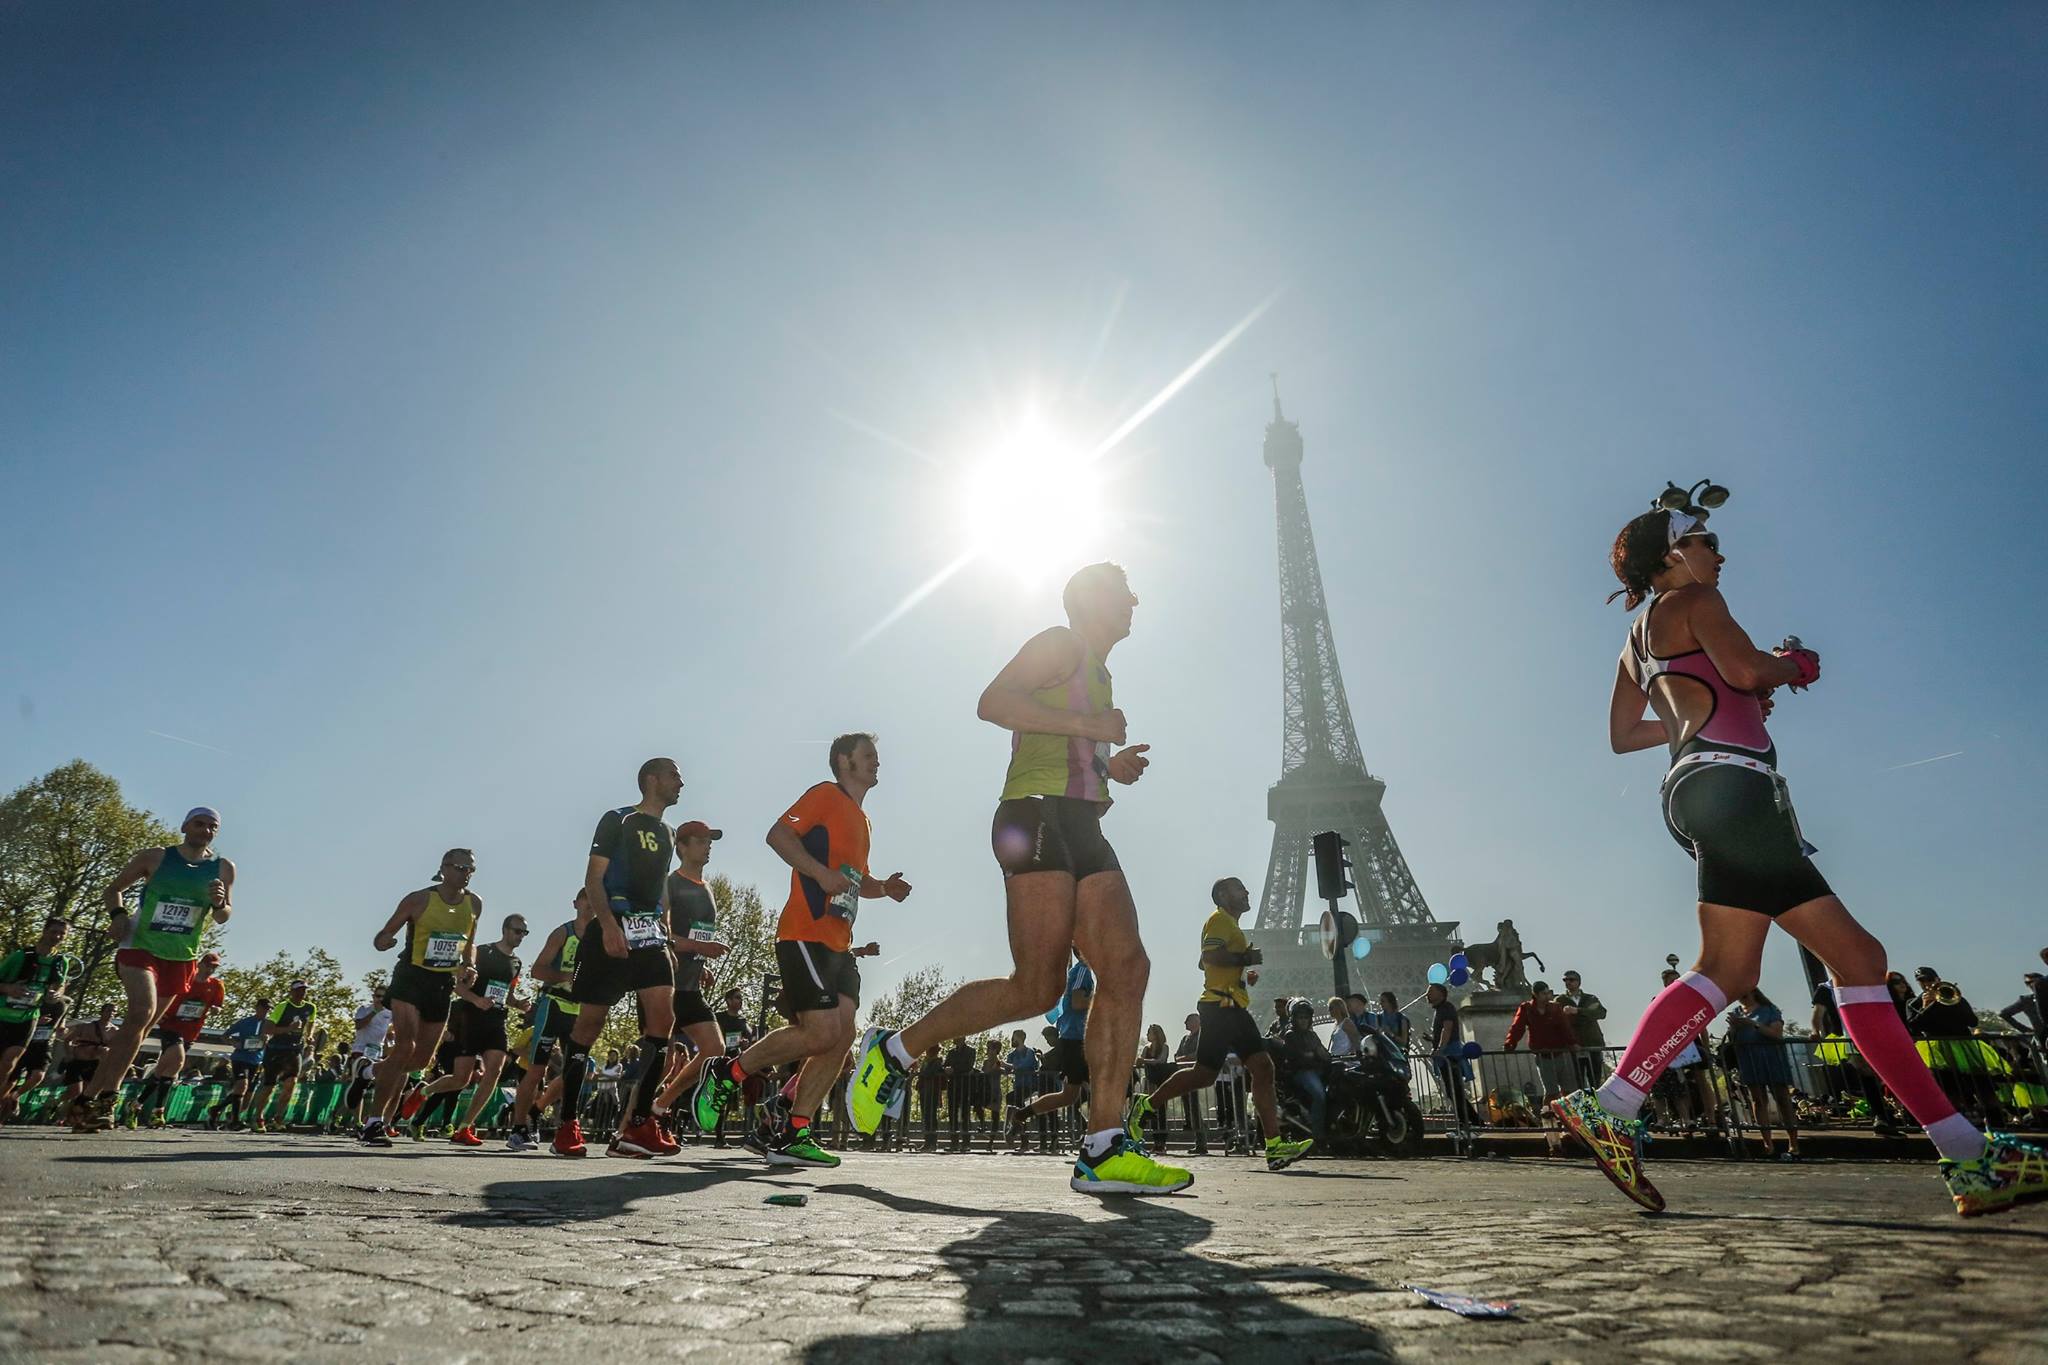 Group of people running near the Eiffel Tower in Paris.